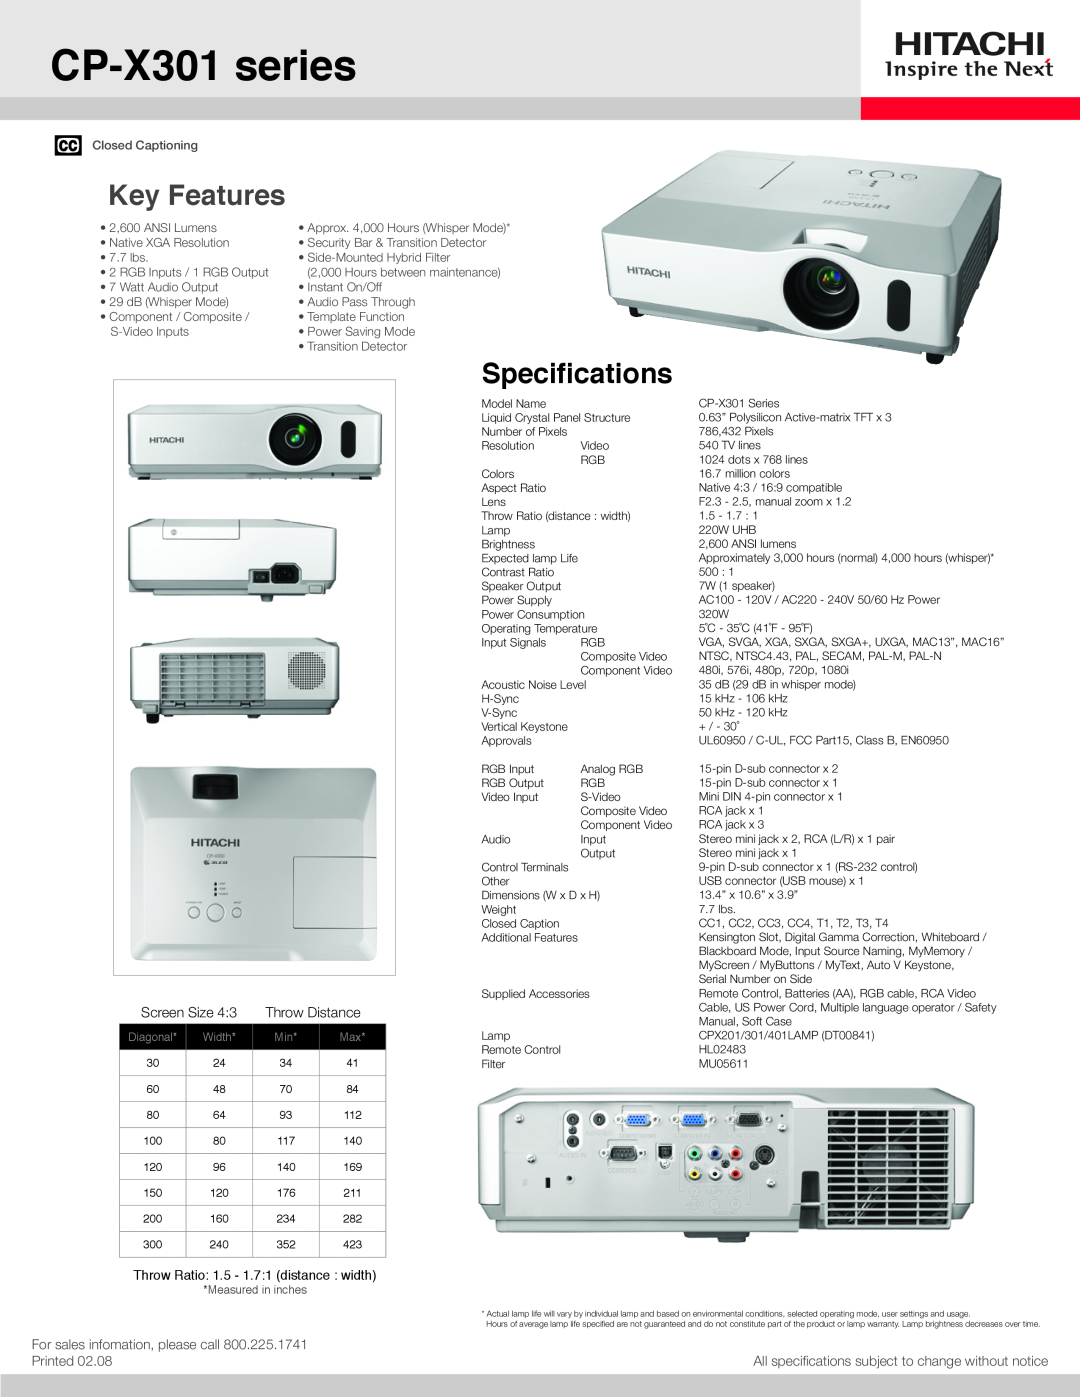 Hitachi CPX301 specifications CP-X301series, Key Features, Specifications, Screen Size, Throw Distance, Printed, Diagonal 